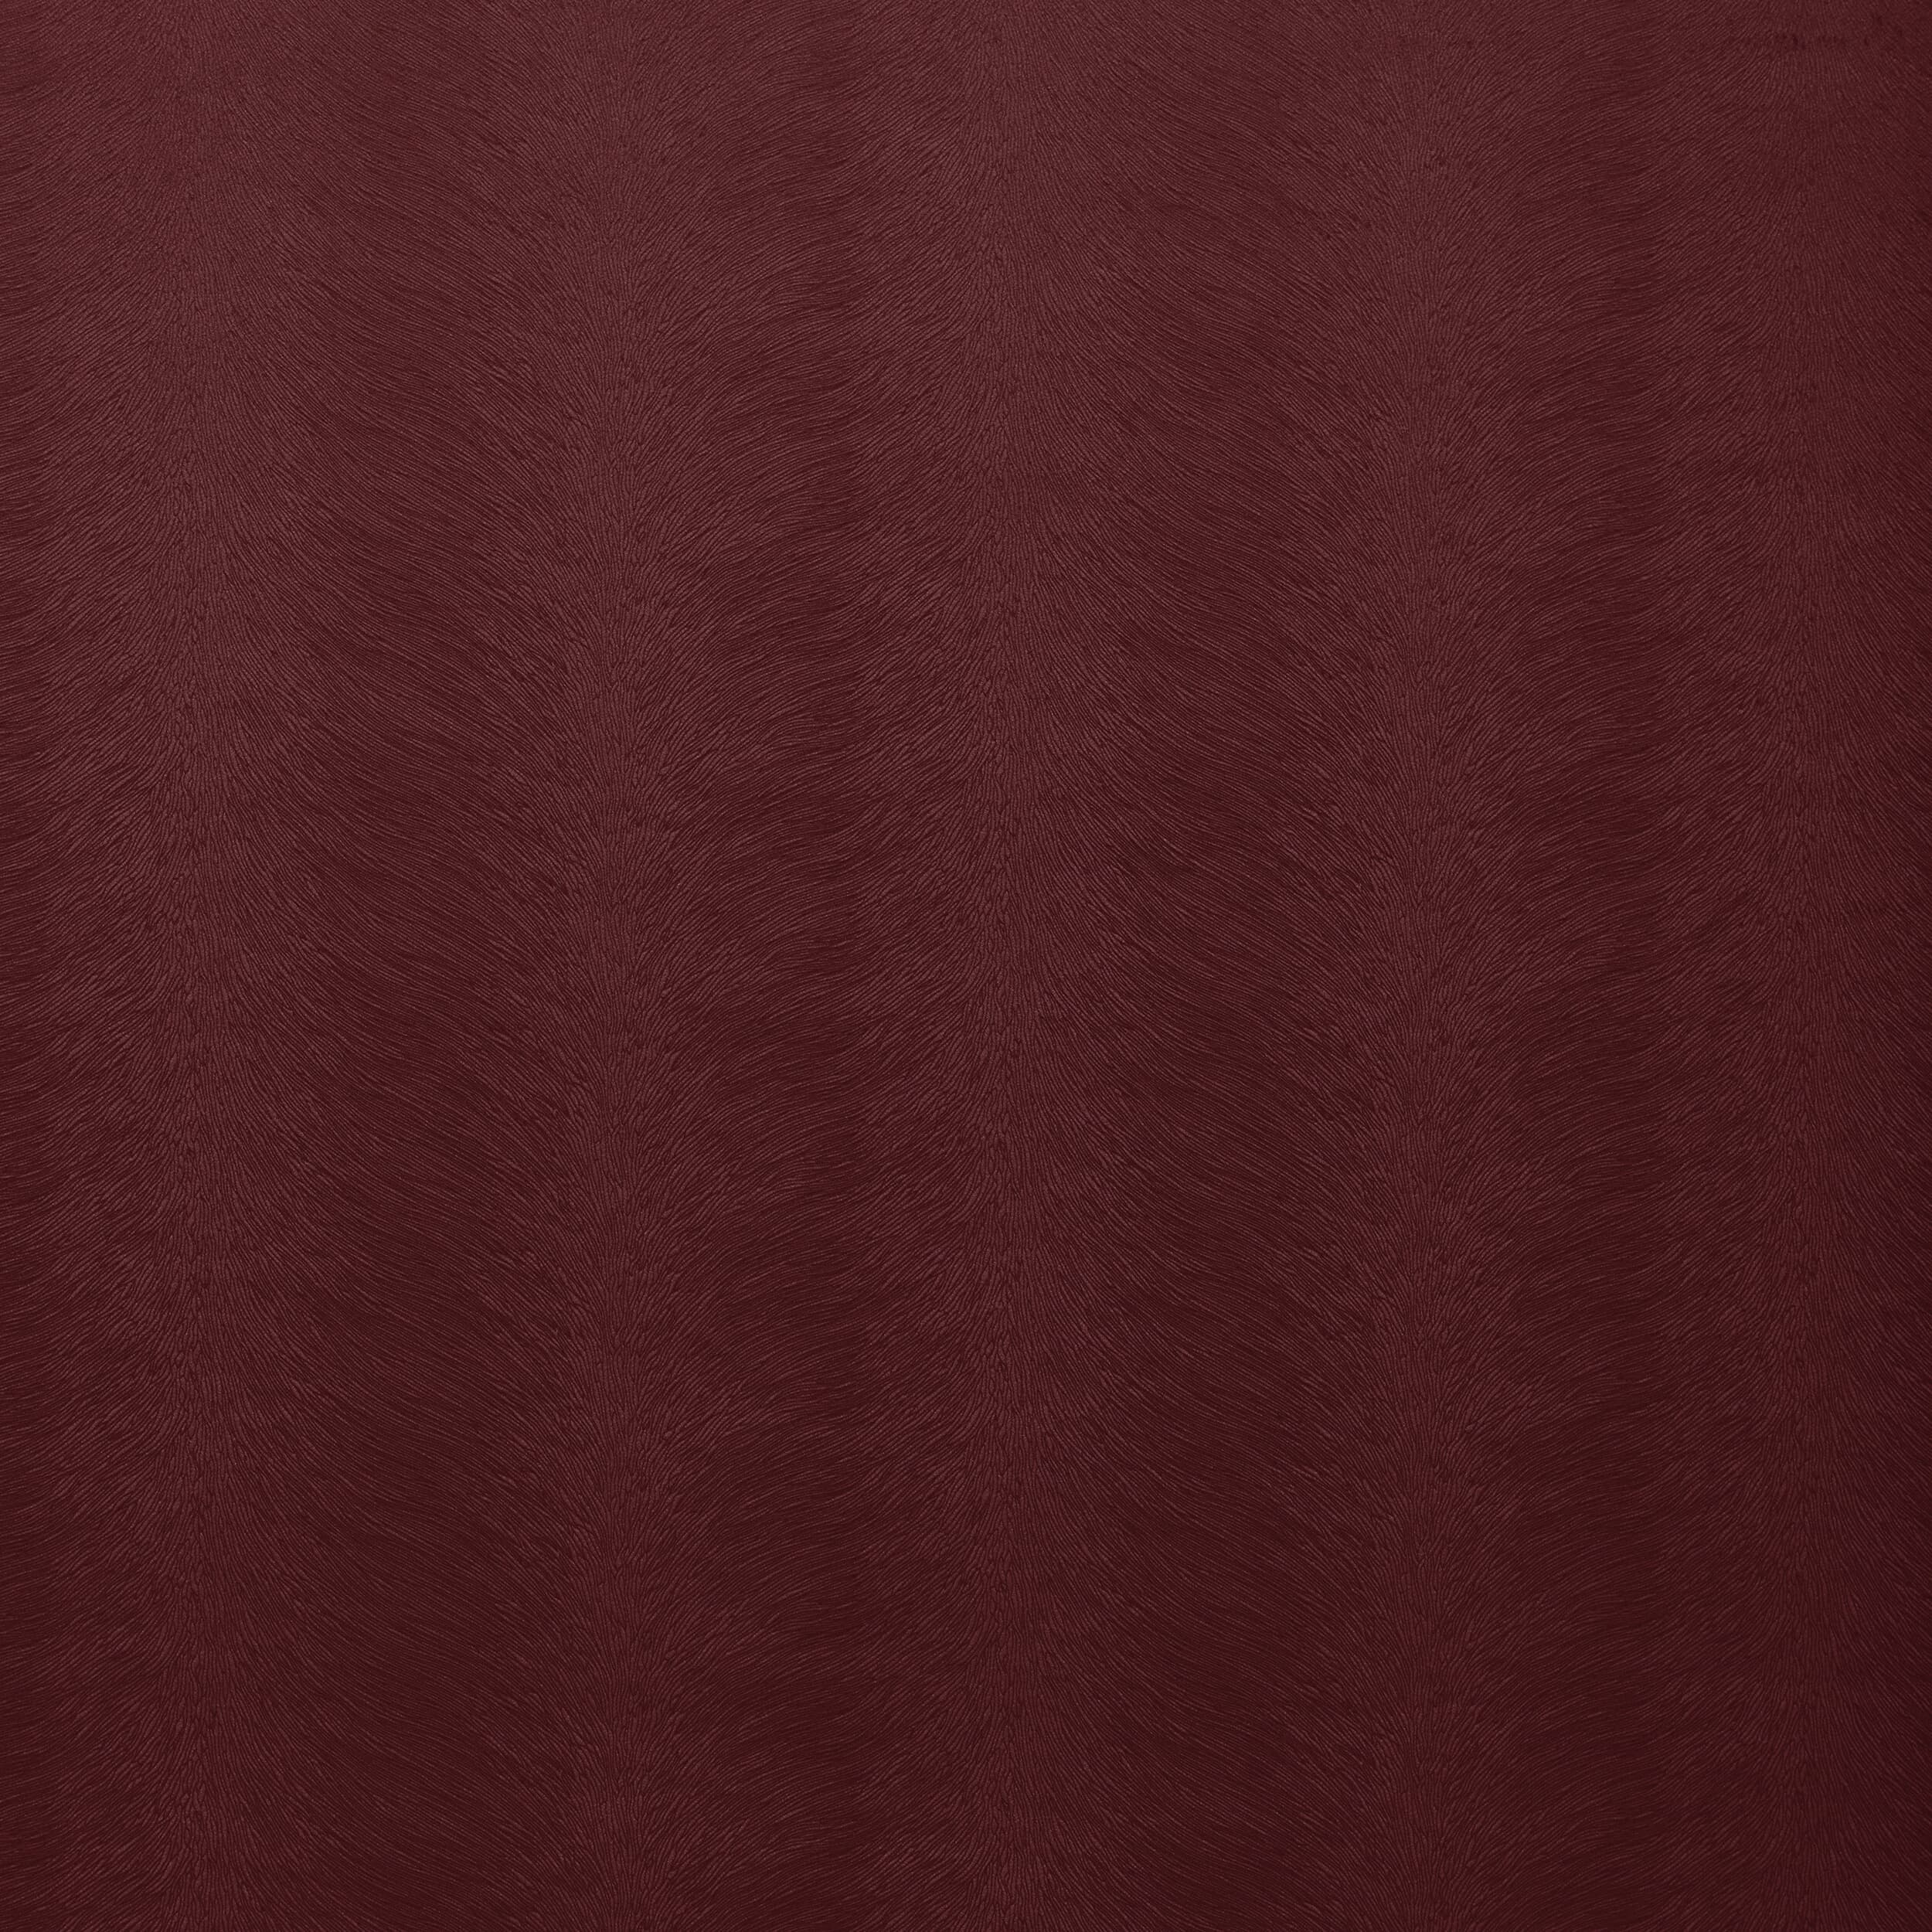 Trifecta 25 Burgundy by Stout Fabric